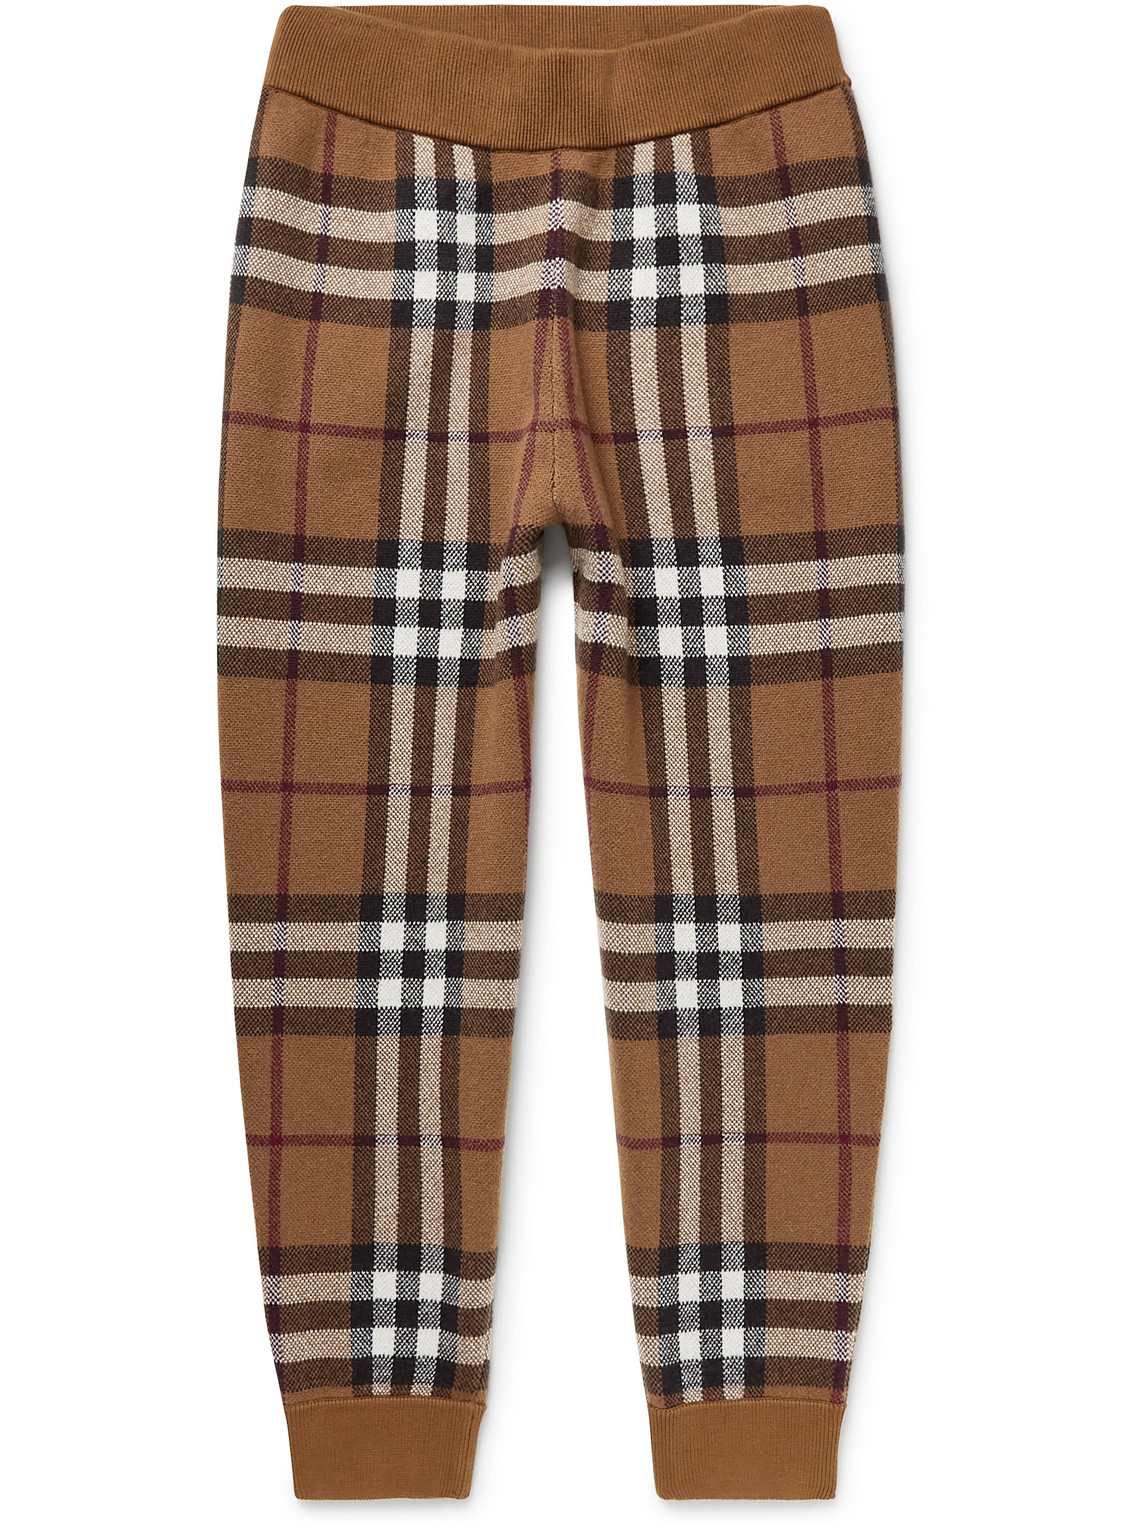 Checked Cashmere-Jacquard Tapered Sweatpants